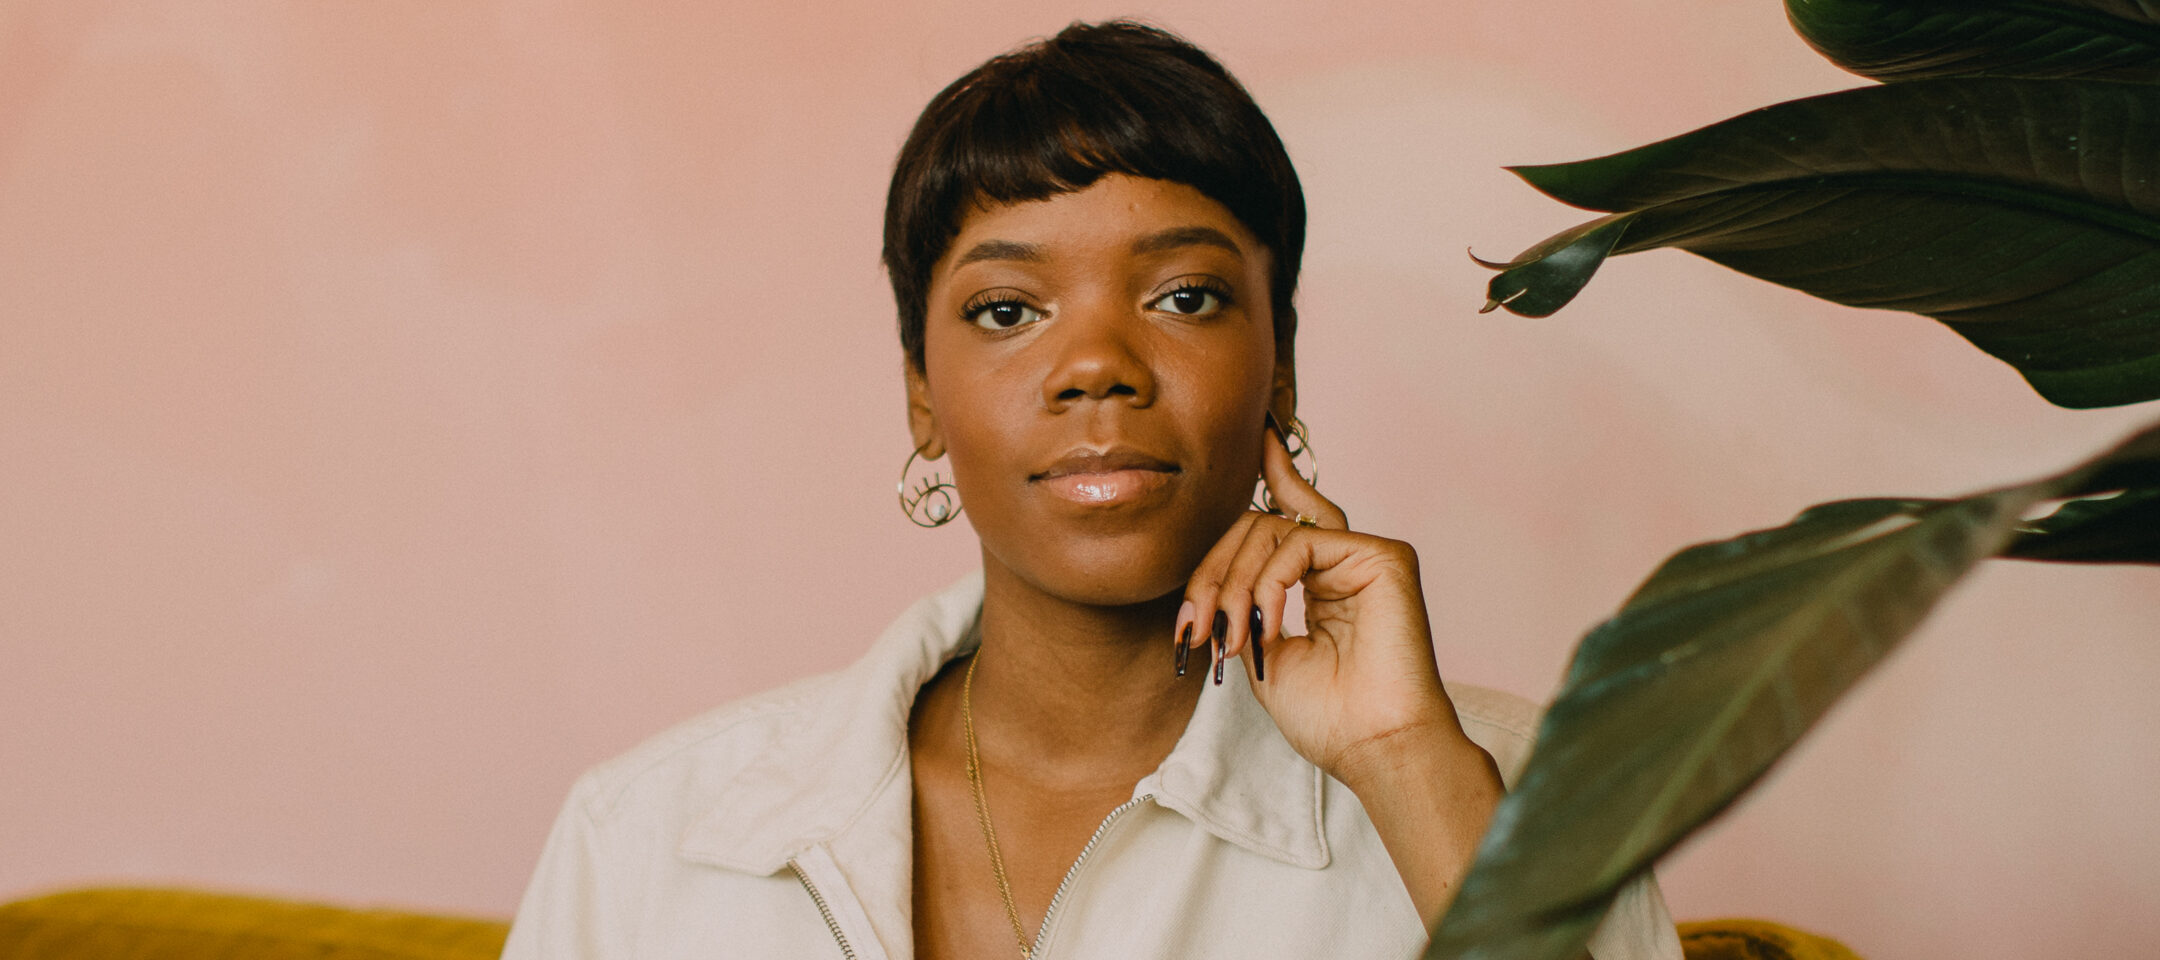 A dark-skinned woman with a short, straight pixie cut sits in a relaxed pose on a velvet mustard-colored couch. She wears a off-white jumpsuit and raises her left hand to rest on her cheek as she smiles slightly at the camera. The wall behind her is painted a blush-pink color and a wide-leaf large plant is situated to her right.